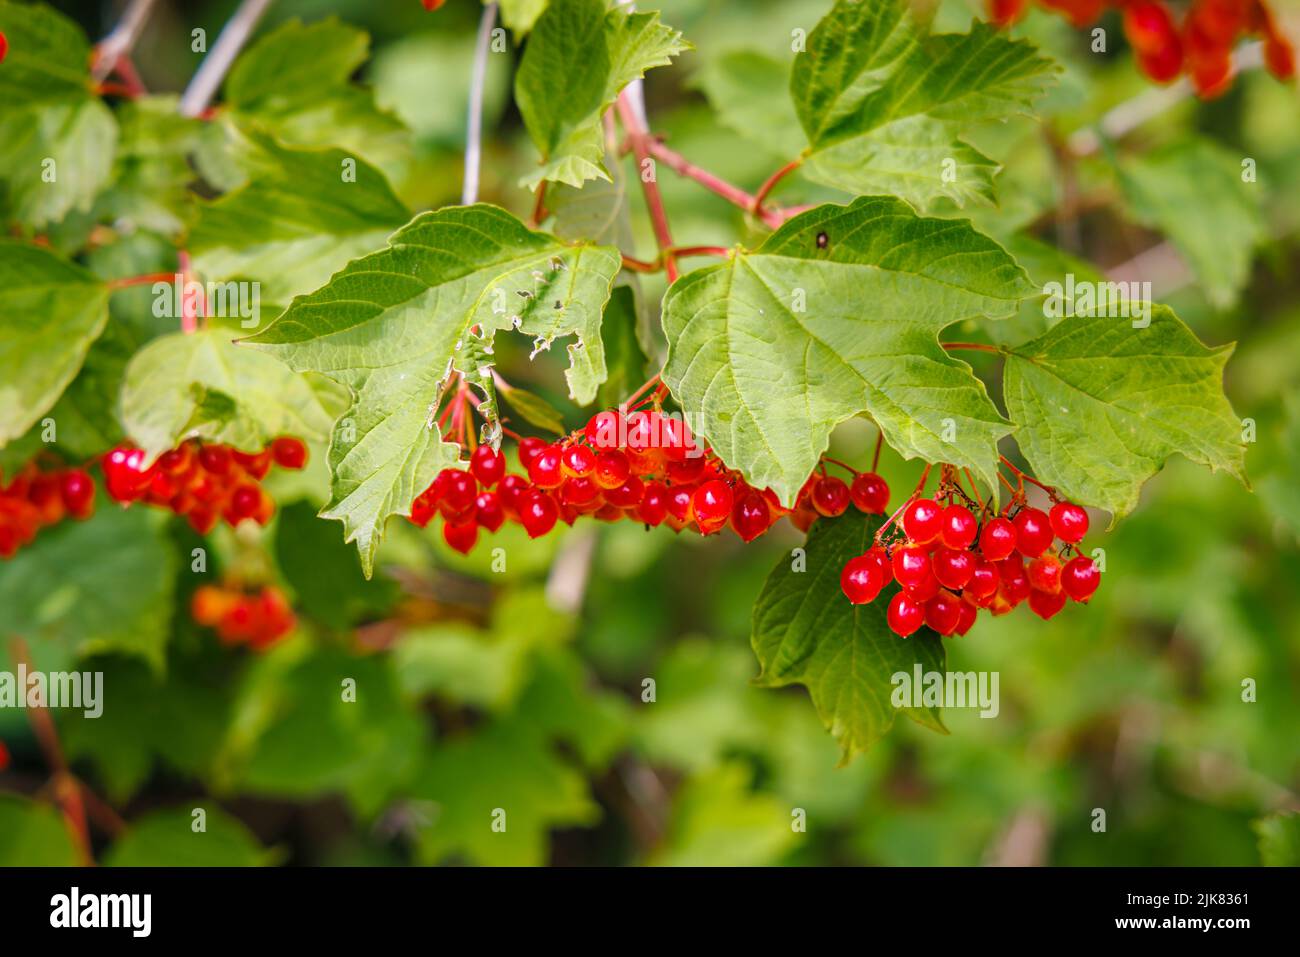 Close-up view of a bunch of orange to red waxy drupes (stone fruits) of Viburnum opulus (guelder rose) in summer in Devon, south-west England Stock Photo